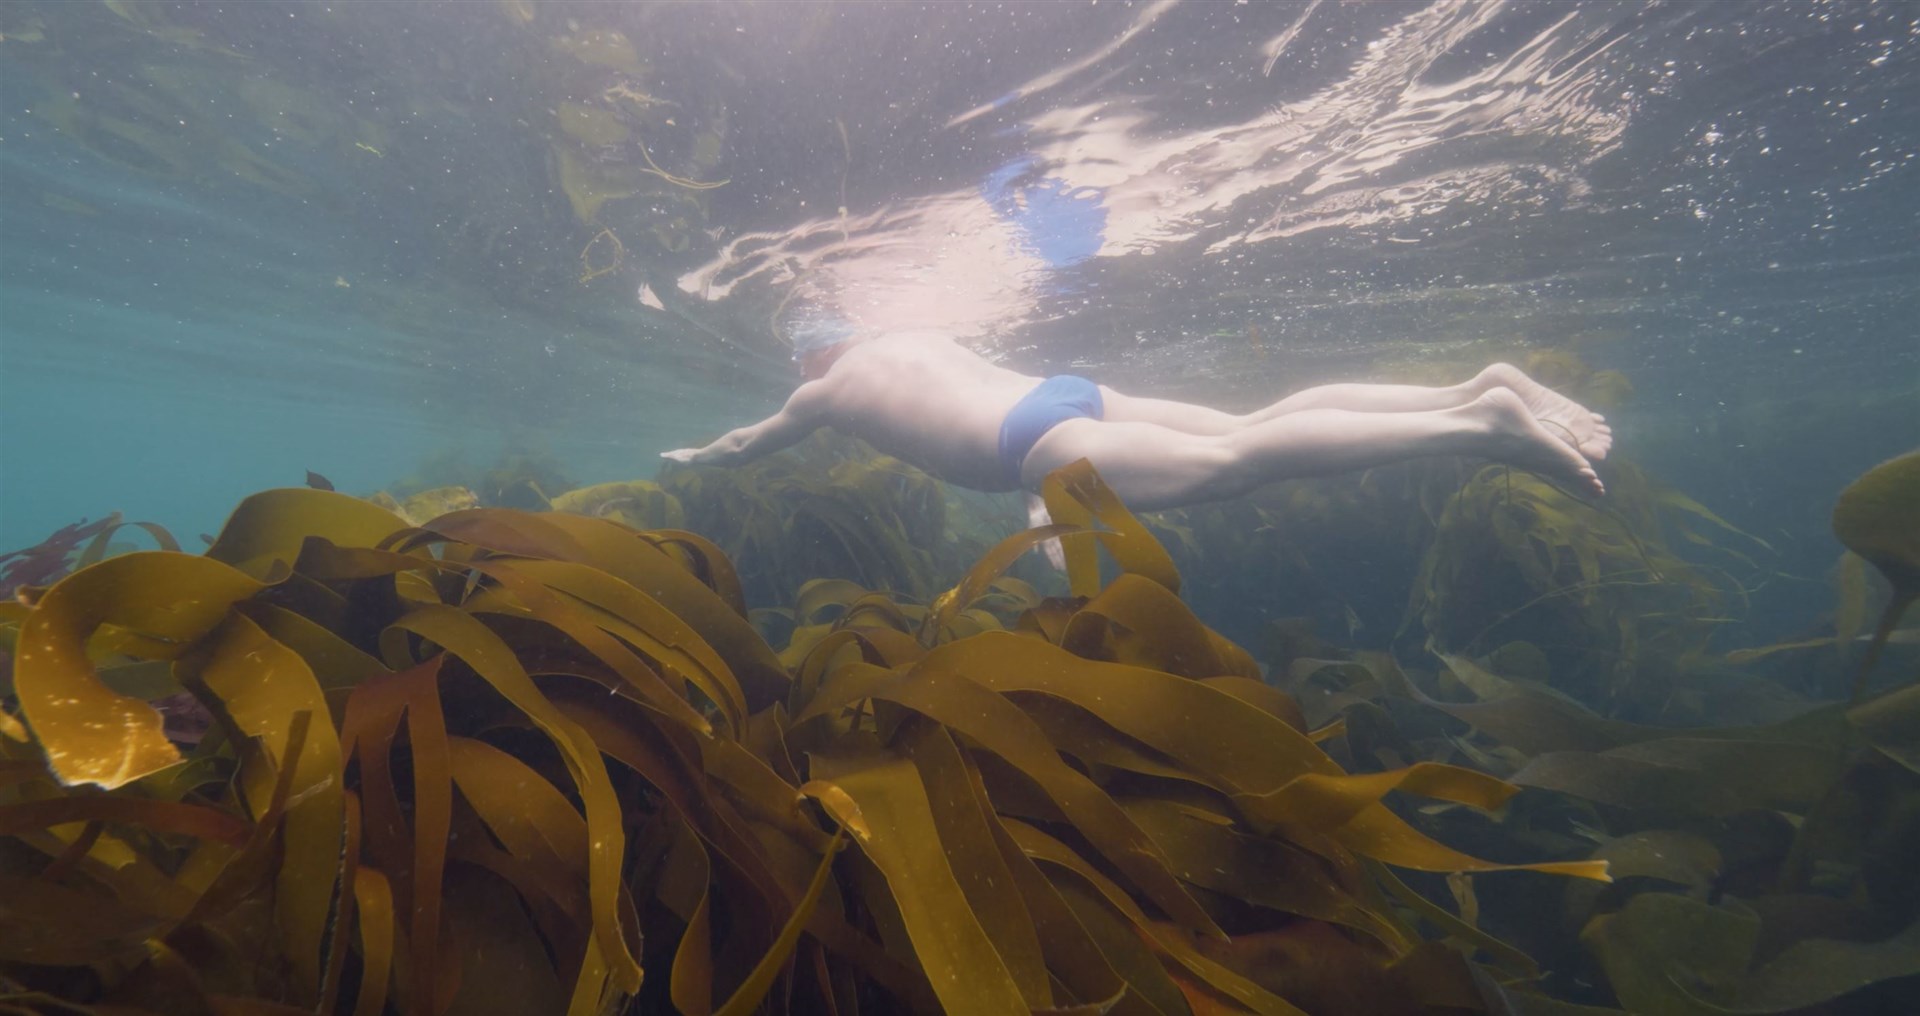 Lewis Pugh swimming among the kelp forests (Lewis Pugh Foundation/PA)